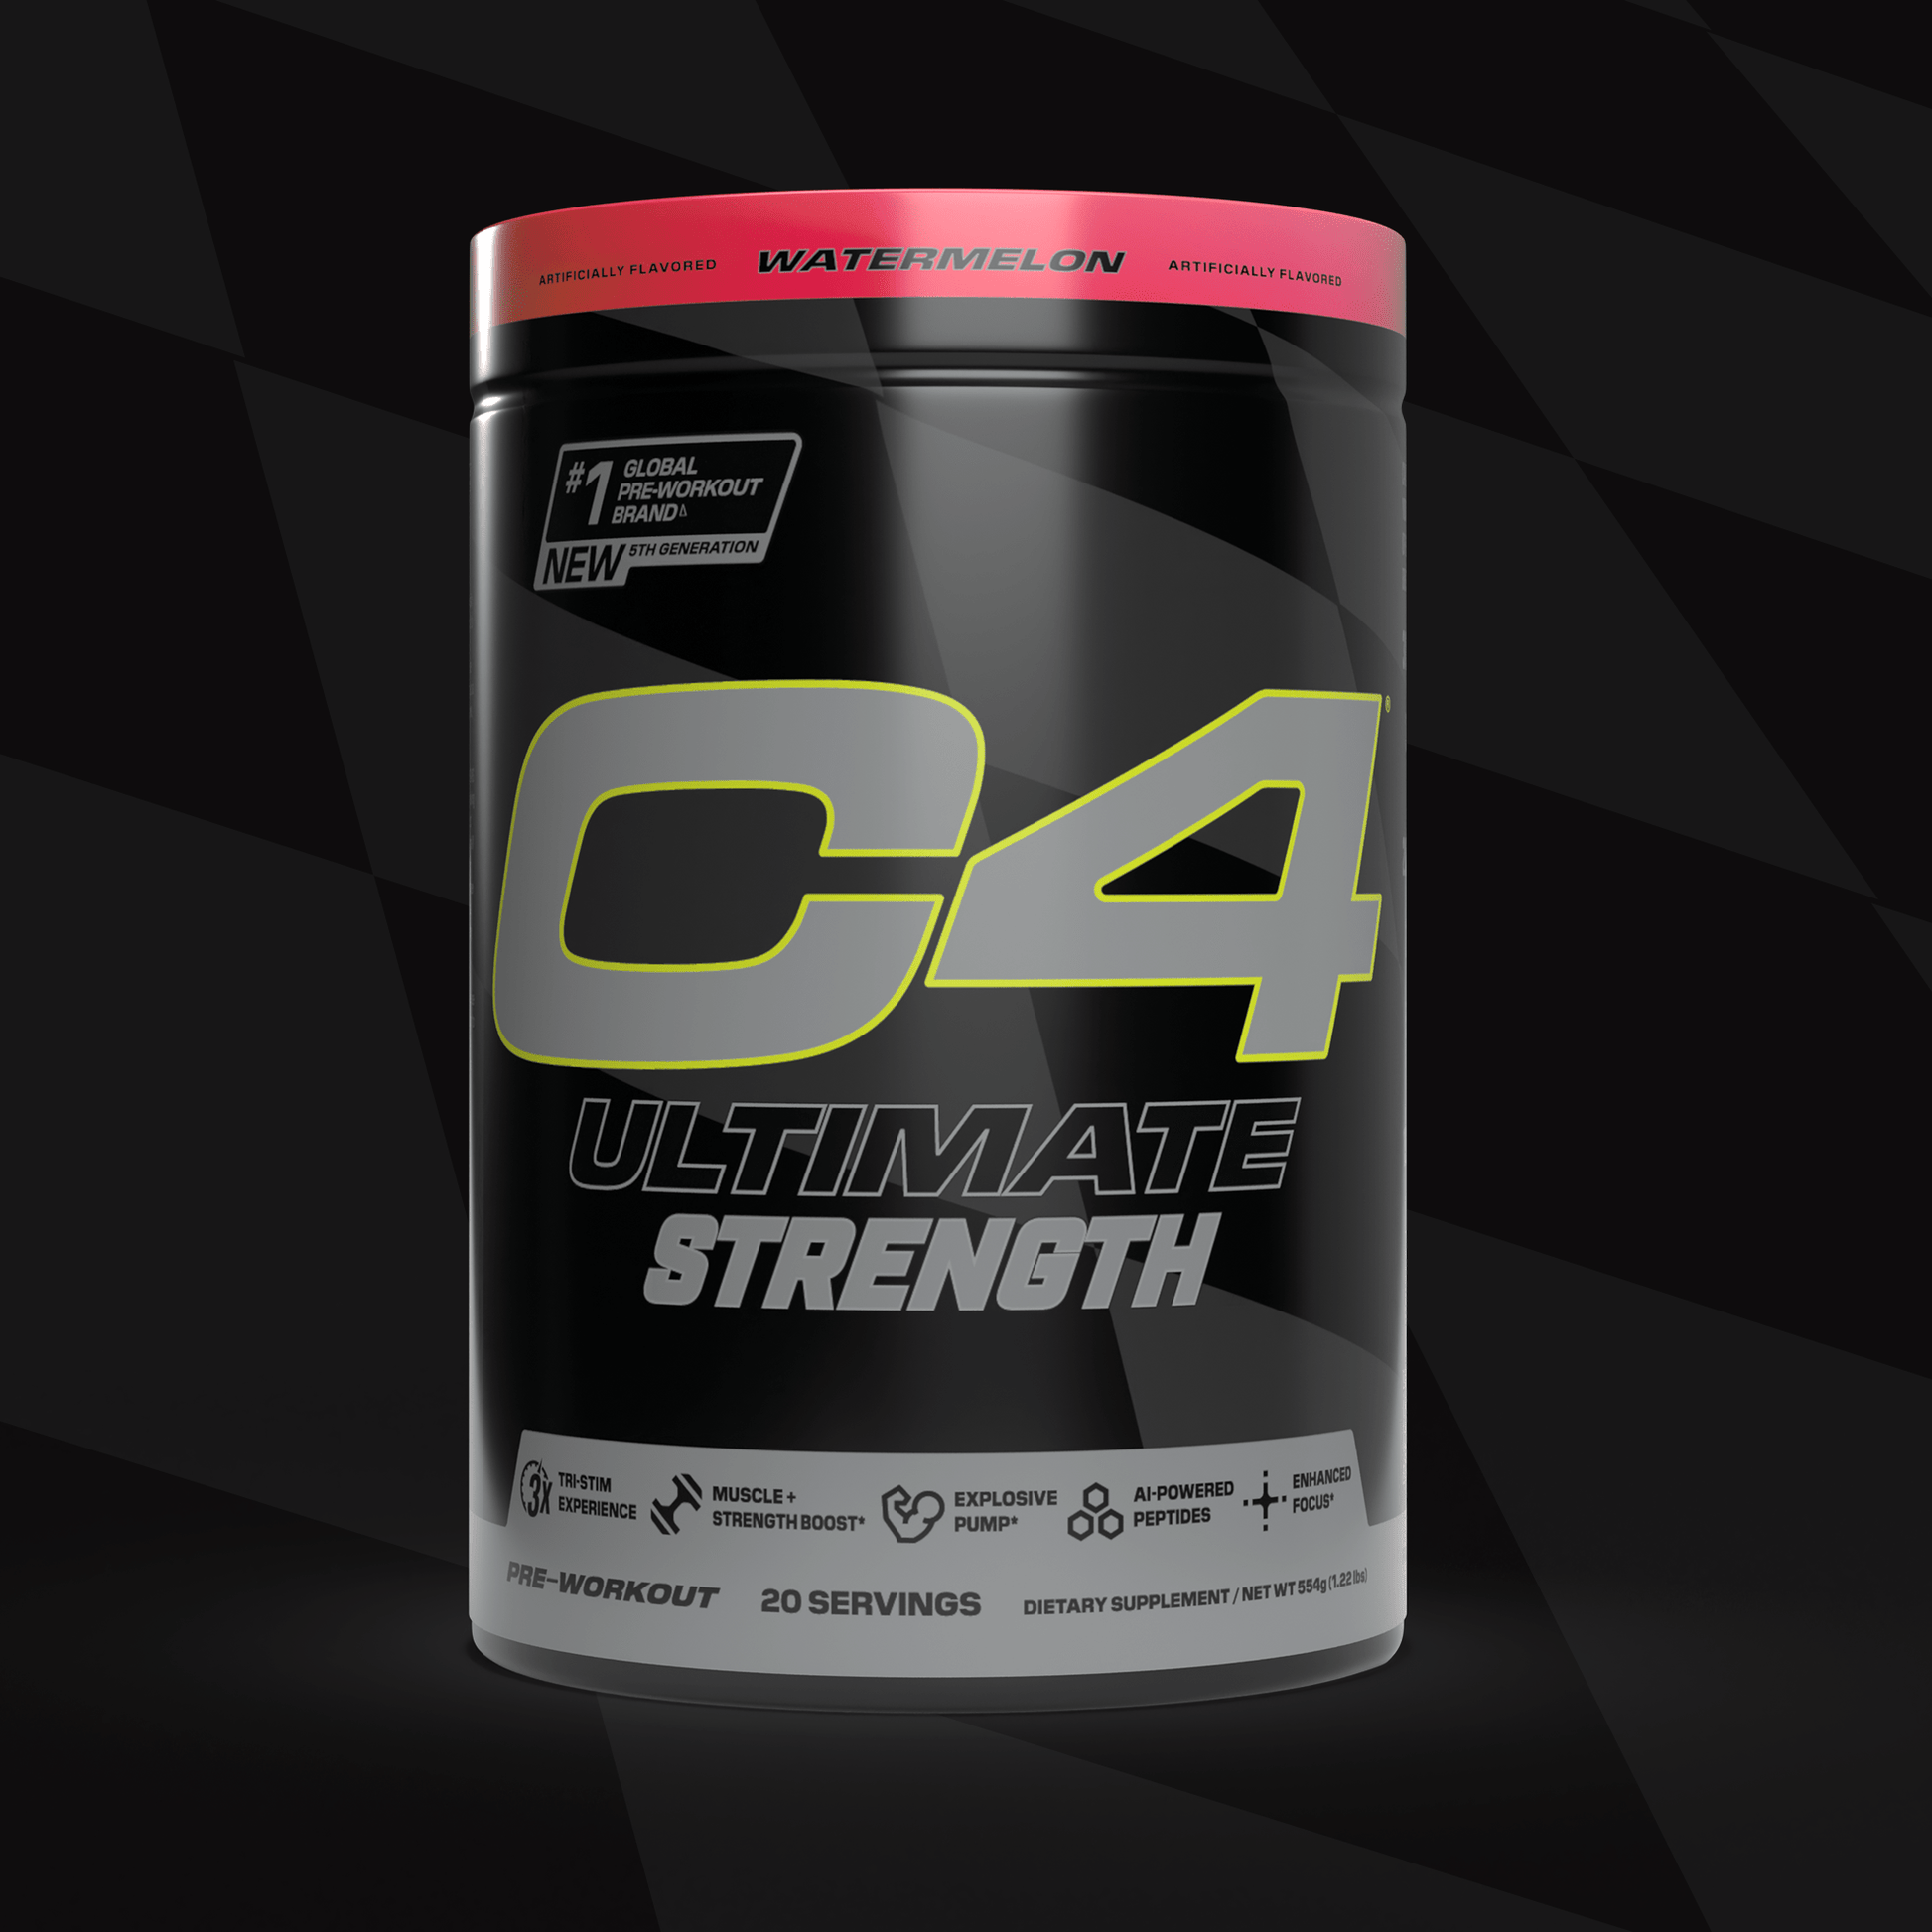 C4 Ultimate Strength Pre Workout Powder View 5